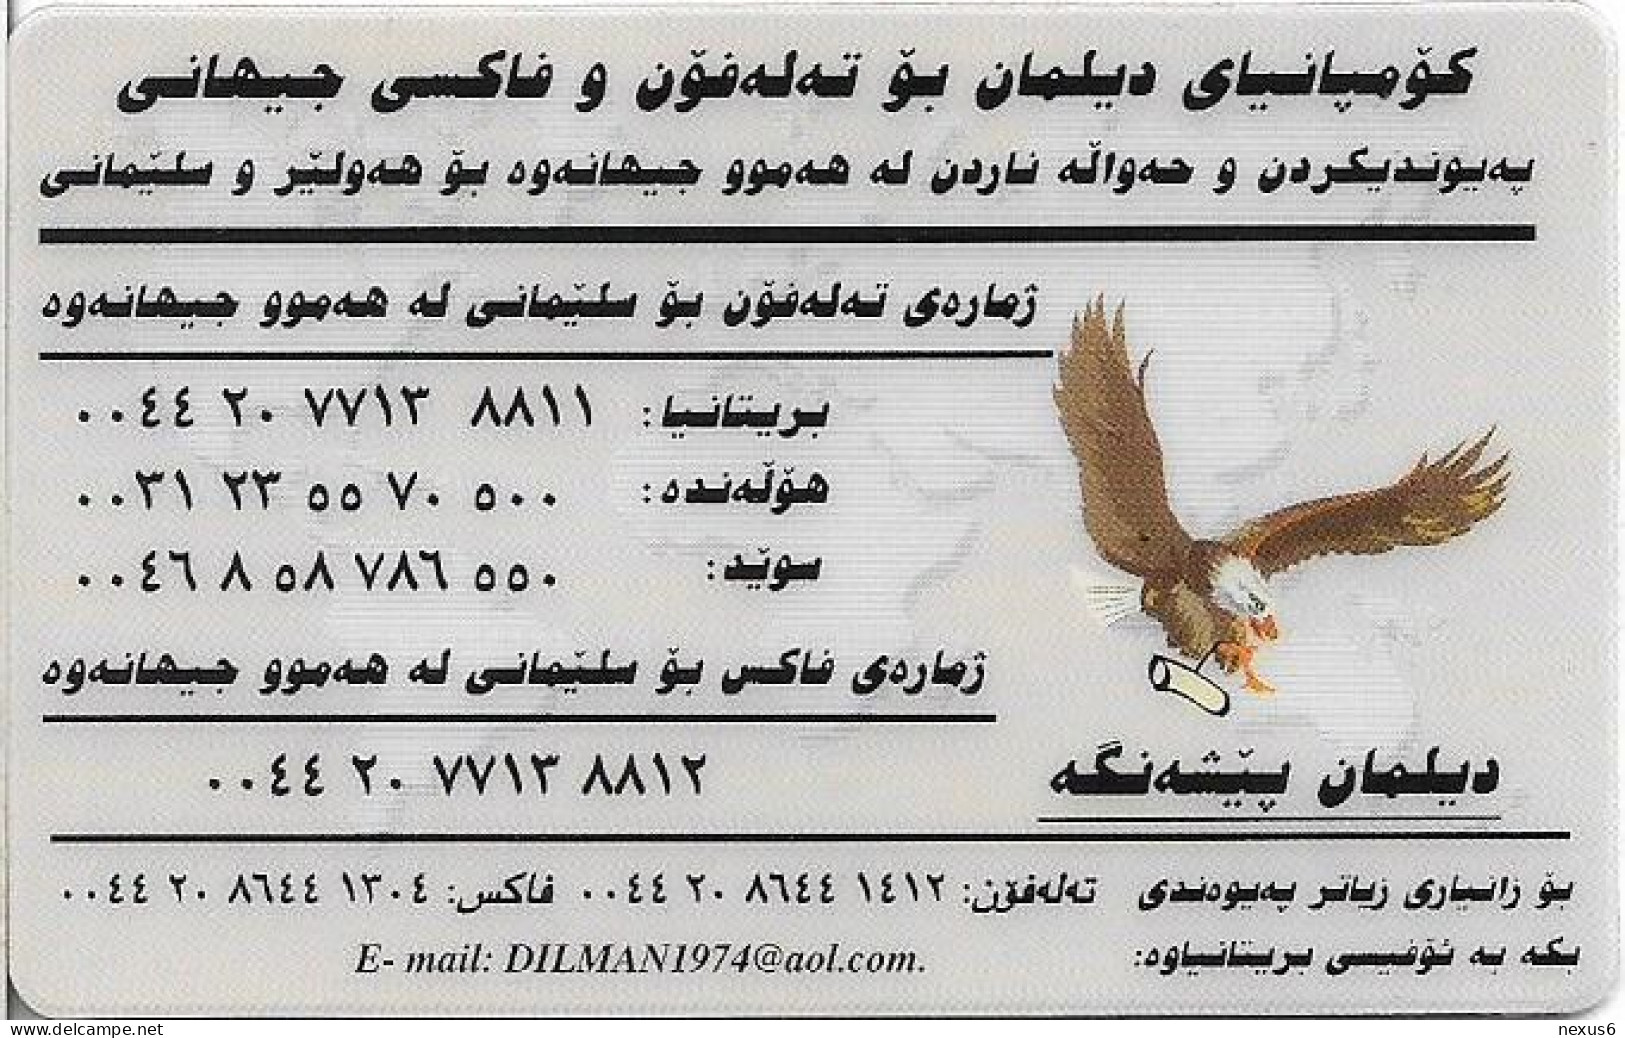 UK & Others - DILMAN (Kurdistan Calls) - Dilman Is The Best, Eagle (White Issue), Remote Mem. No FV, Used - [ 8] Companies Issues